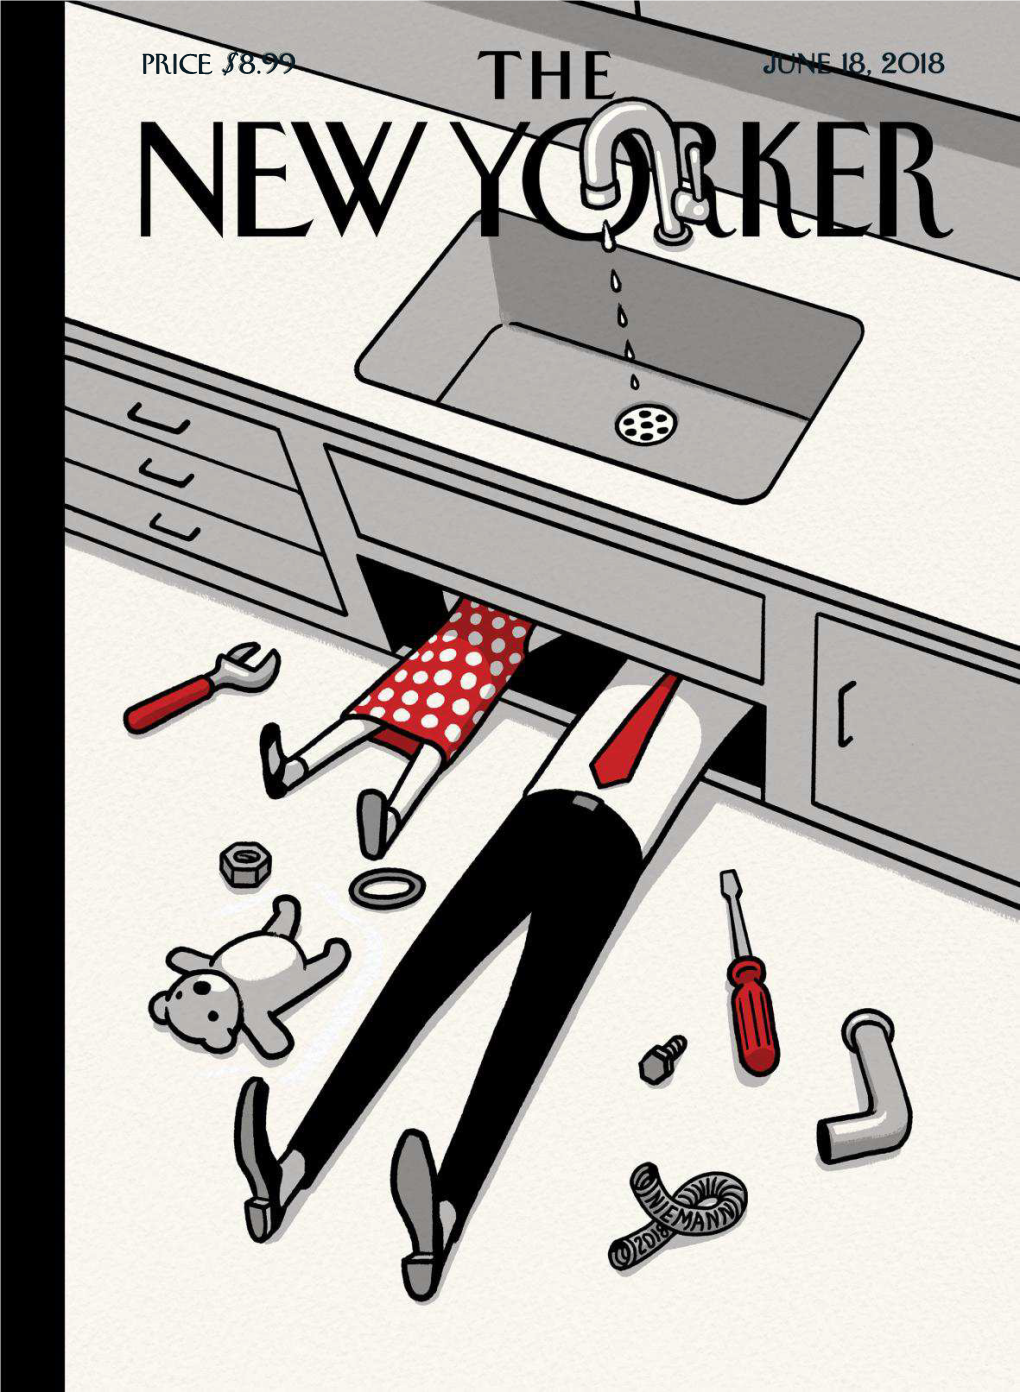 The New Yorker – June 18, 2018.Pdf